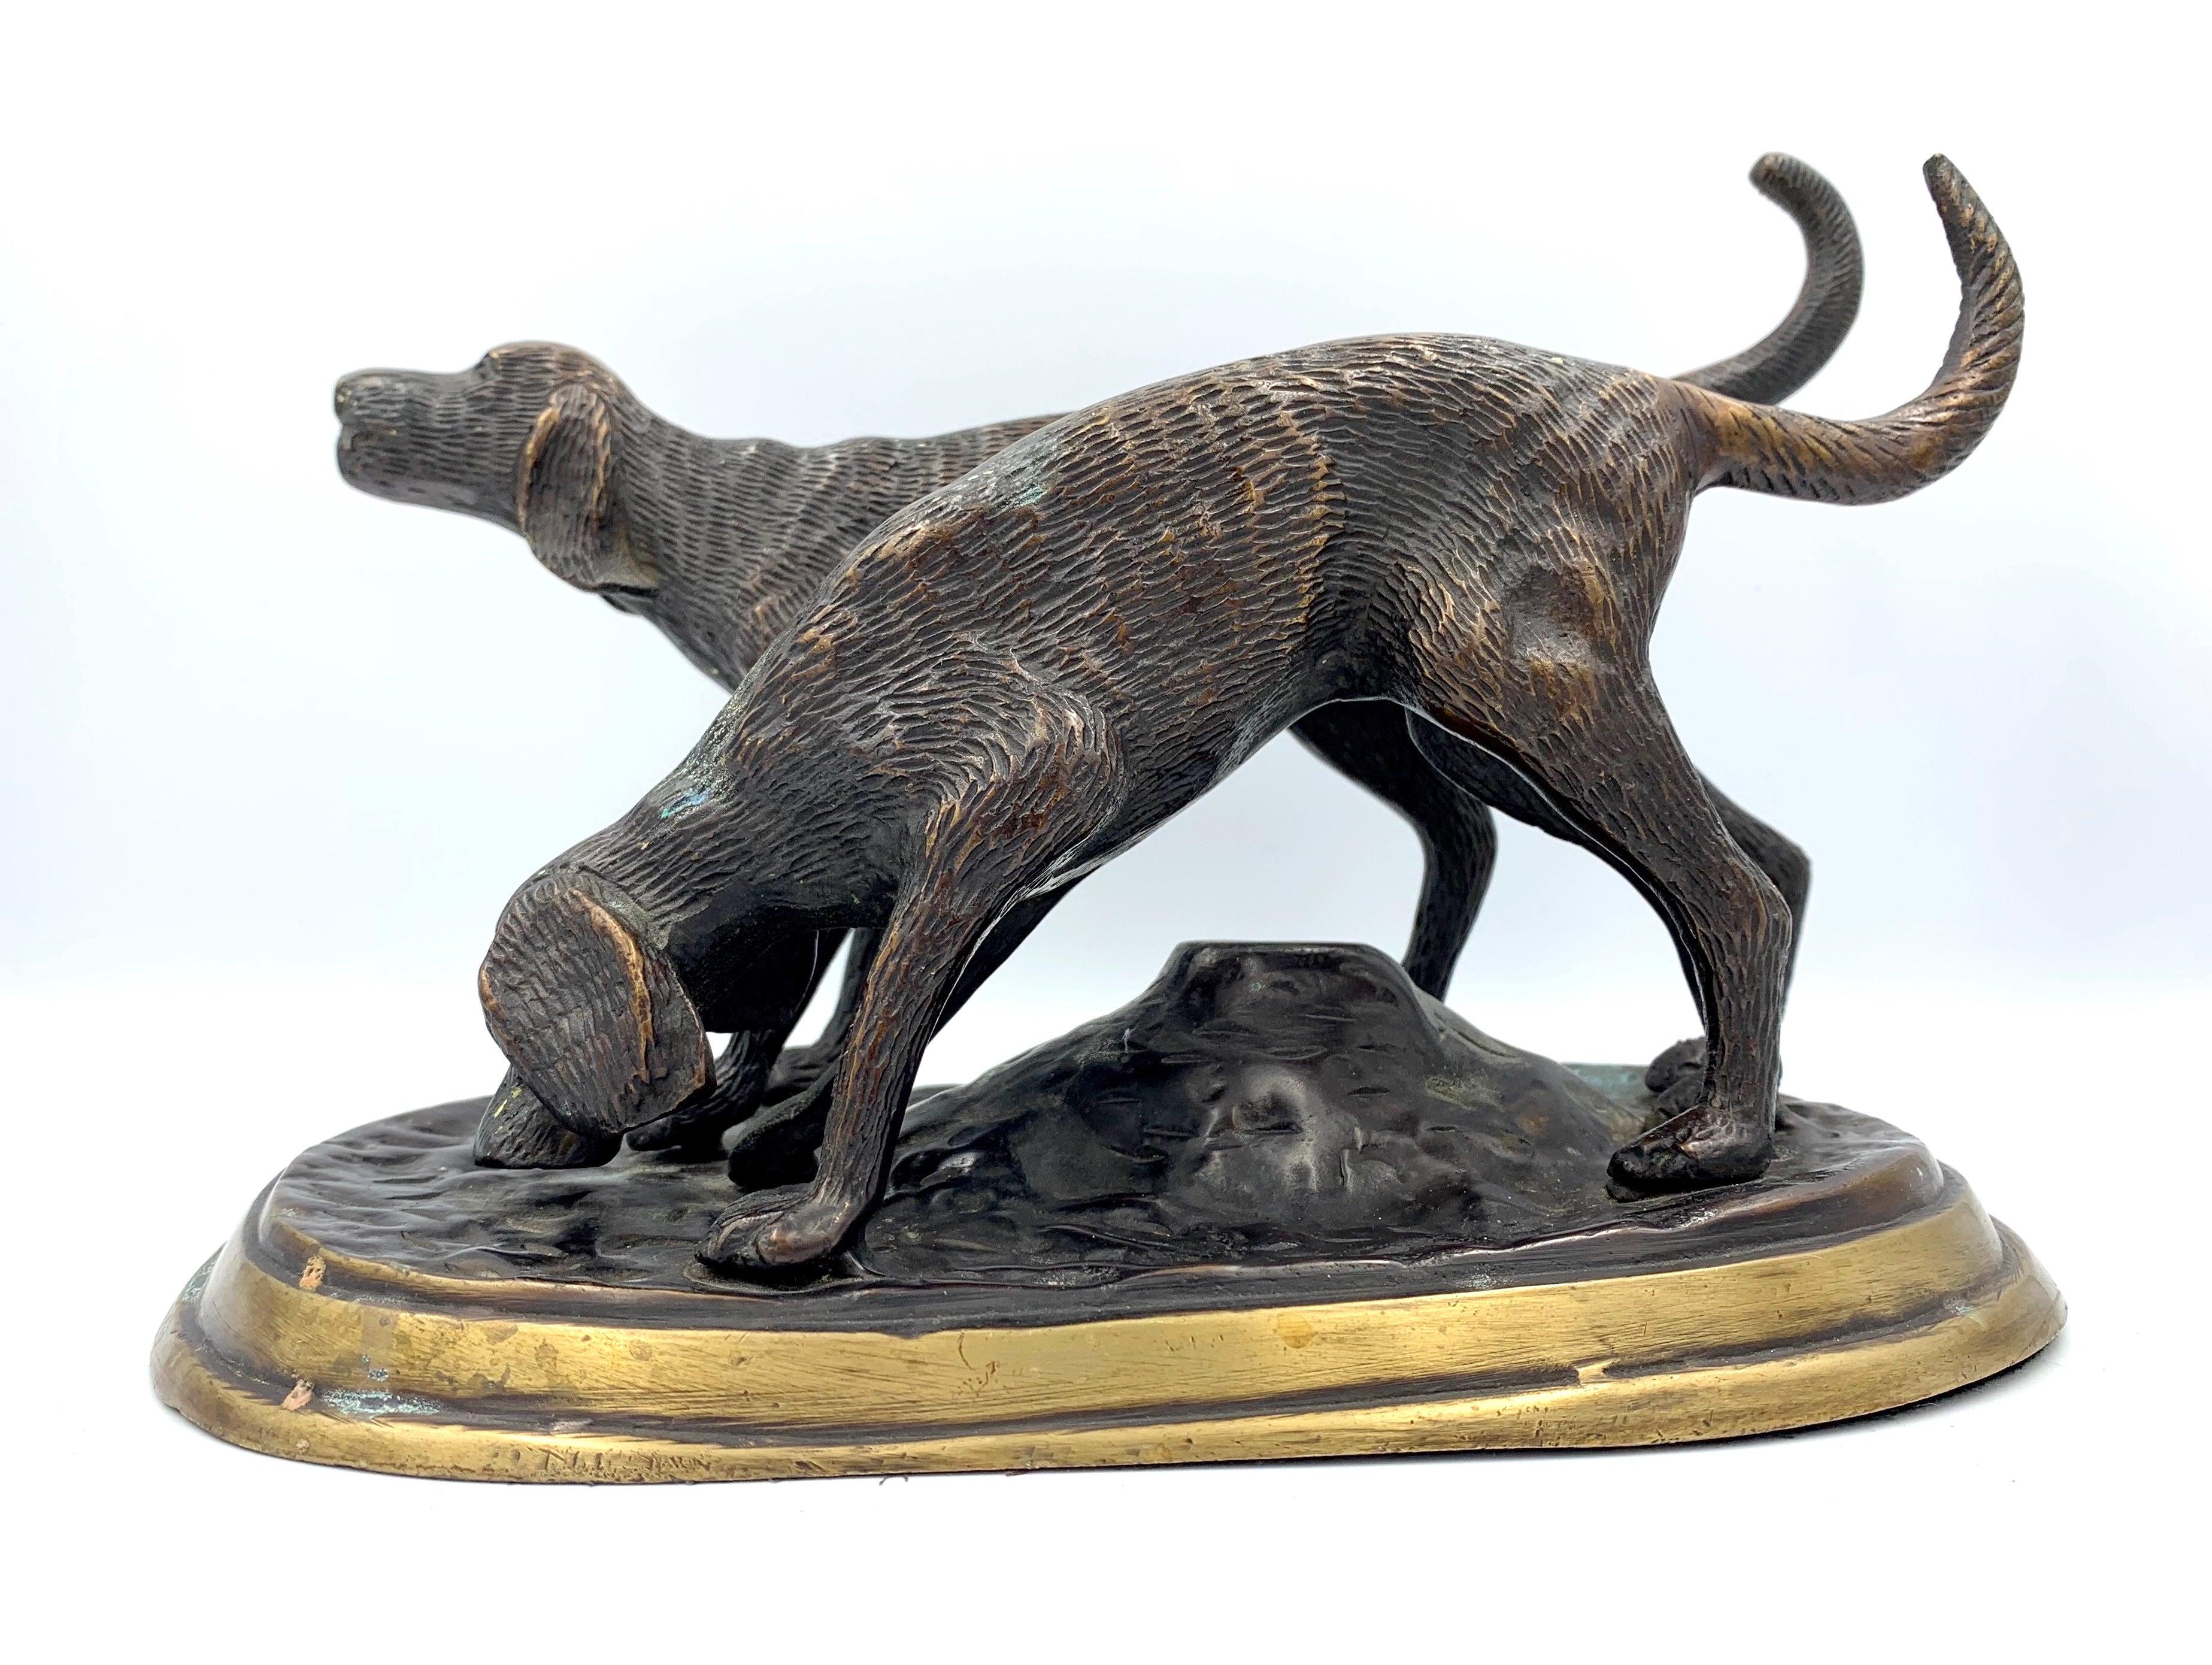 Presented is a bronze sculpture of two hunting dogs. One dog is depicted with his nose to the ground, having caught the scent of the hunt. The other dog points ahead, his body positioned to start the chase. The sculpture was cast using the lost wax